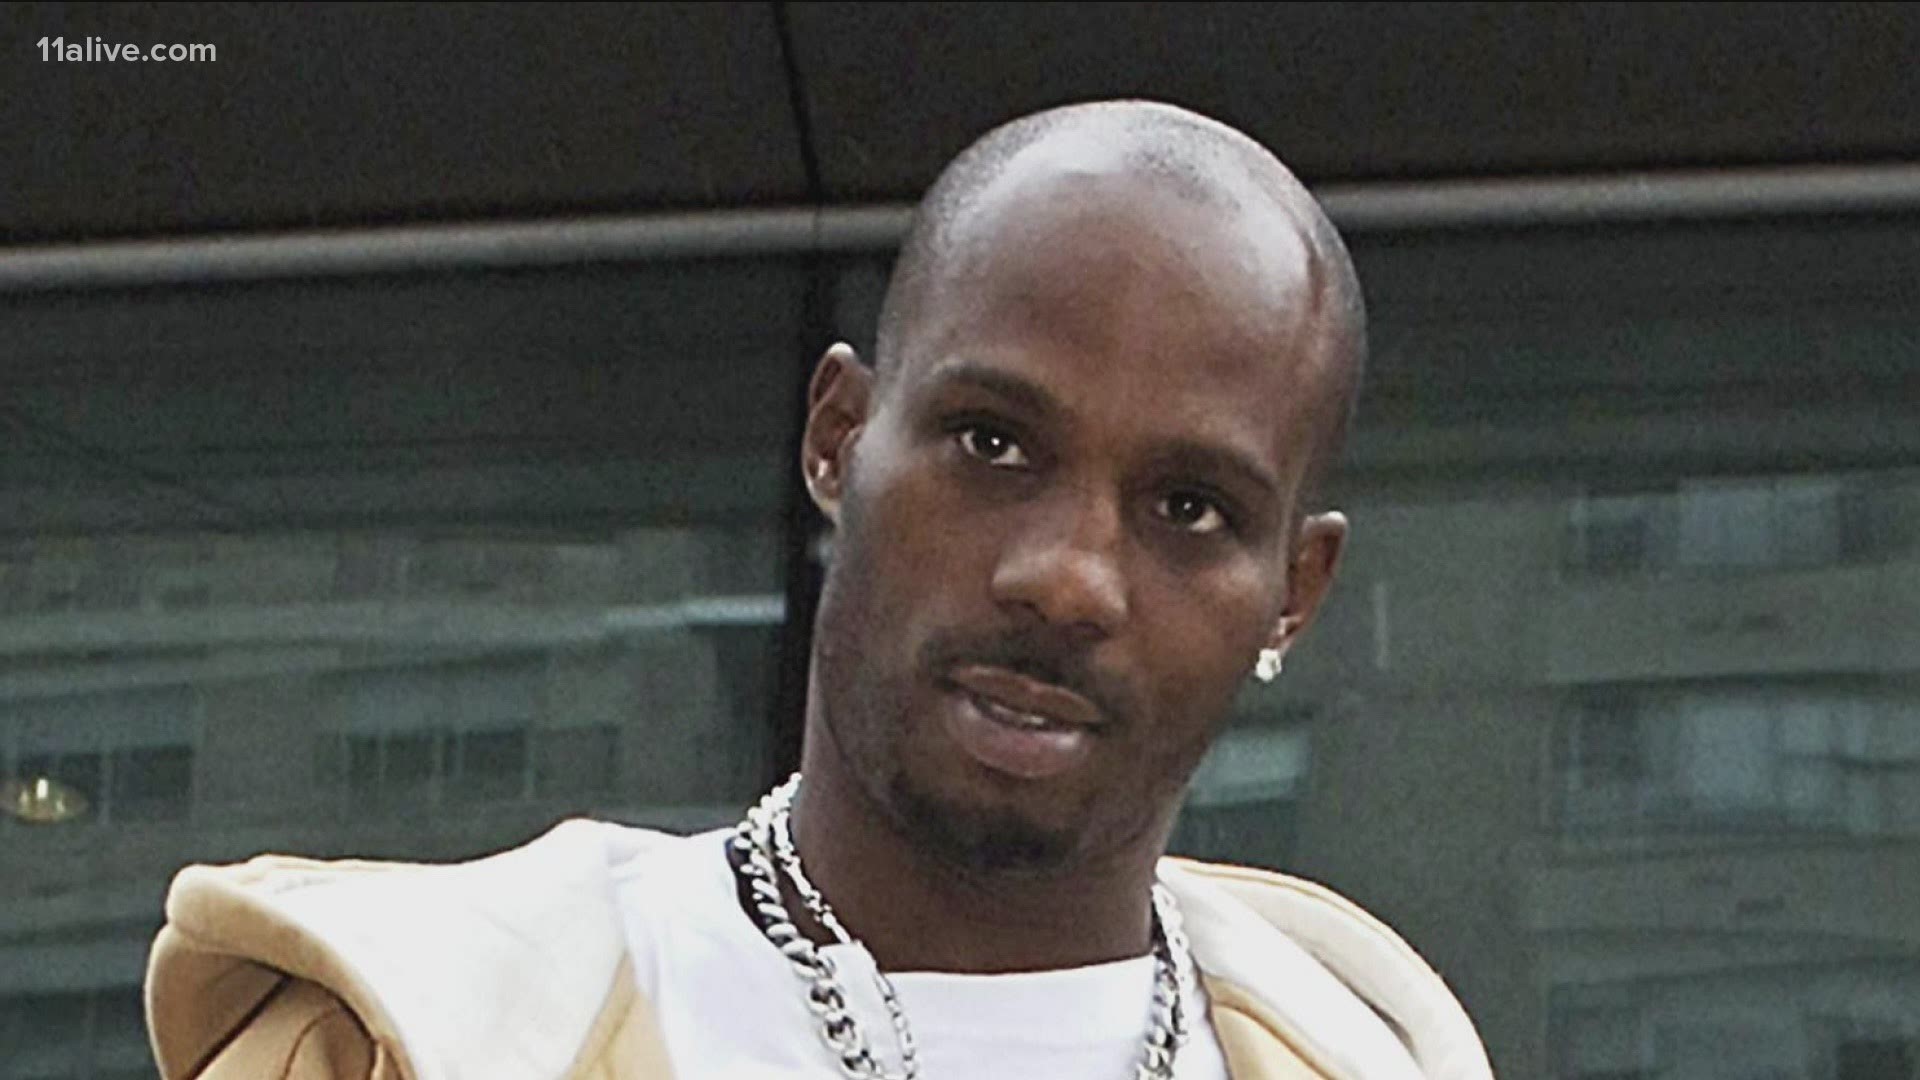 Rapper DMX's official cause of death revealed